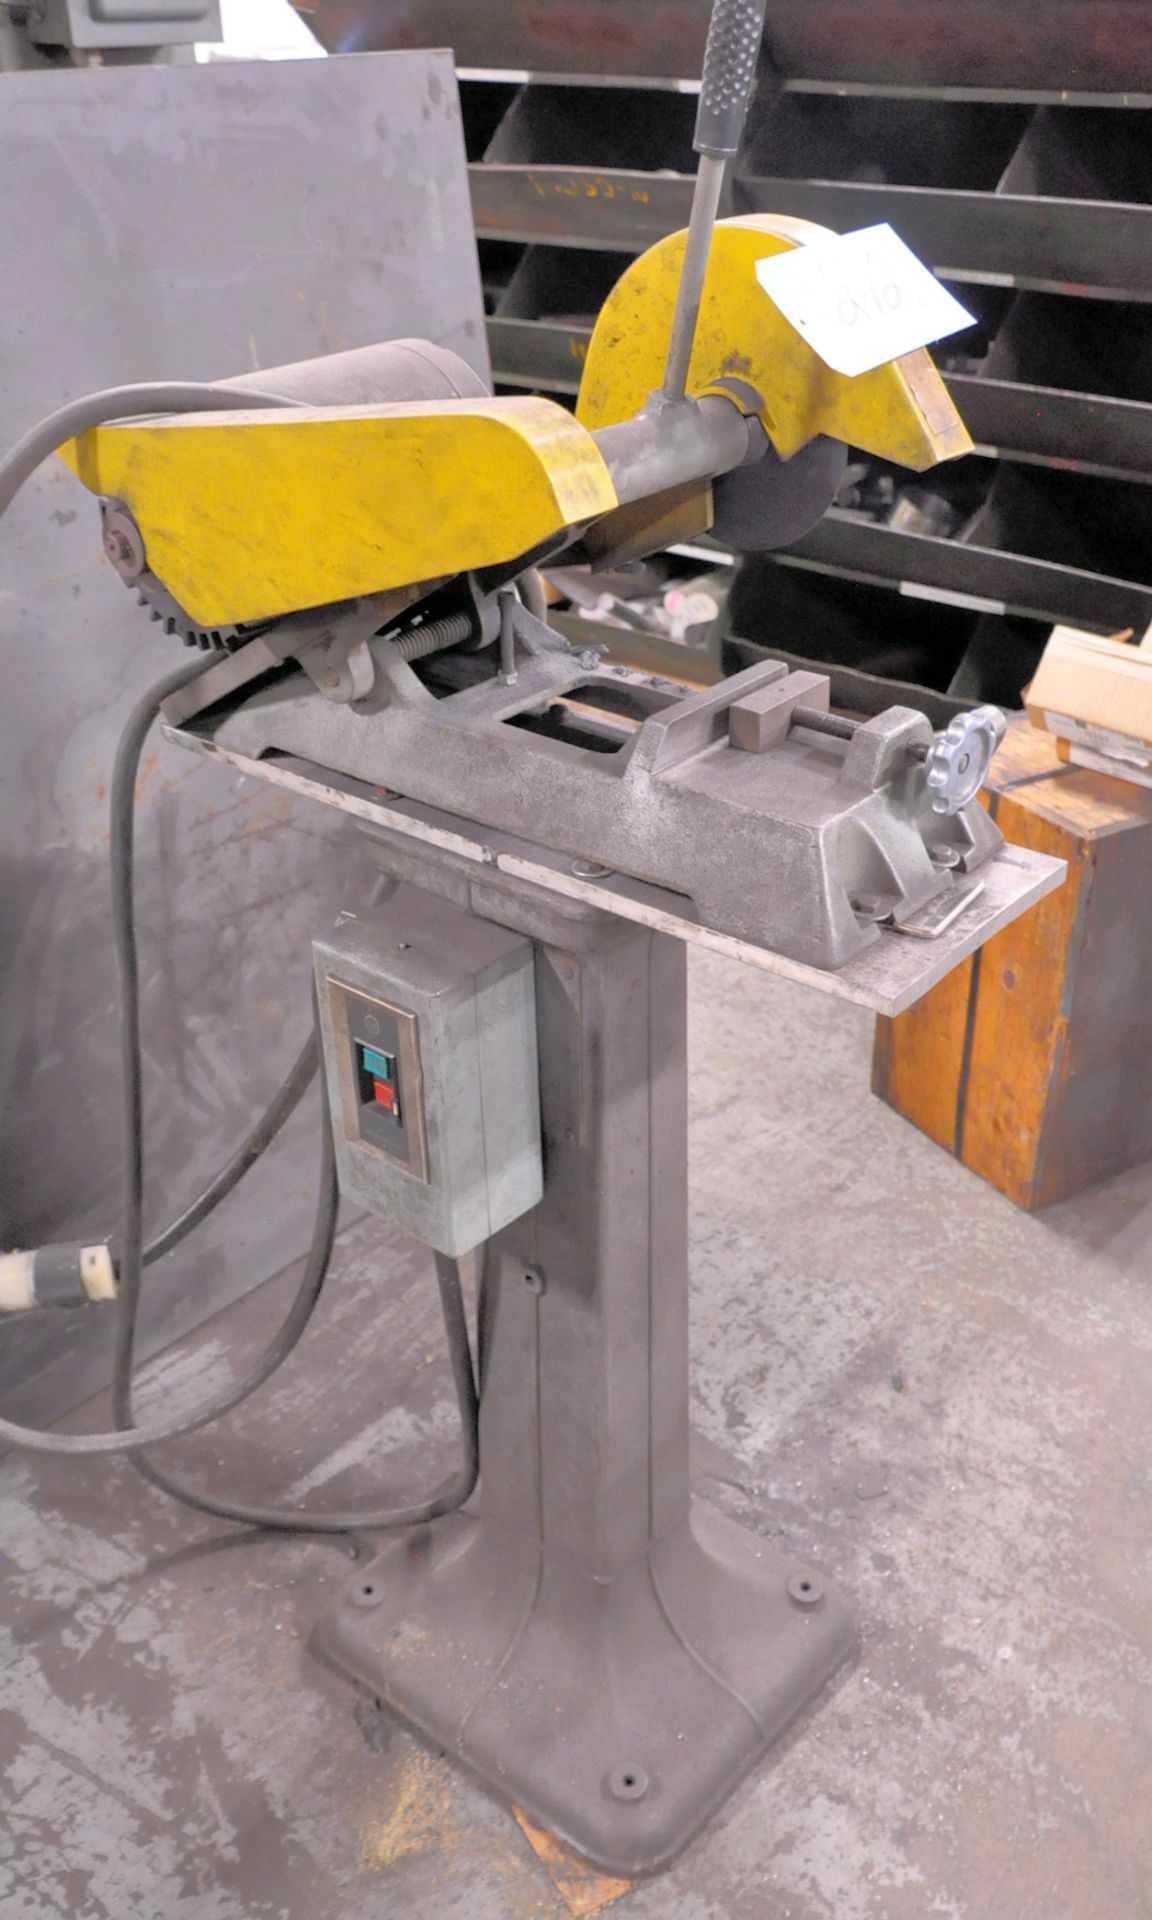 Kalamazoo 7" Abrasive Cutoff Saw with Stand, 3-HP 3-PH, with 12" x 66" Infeed Roller Conveyor - Image 3 of 3